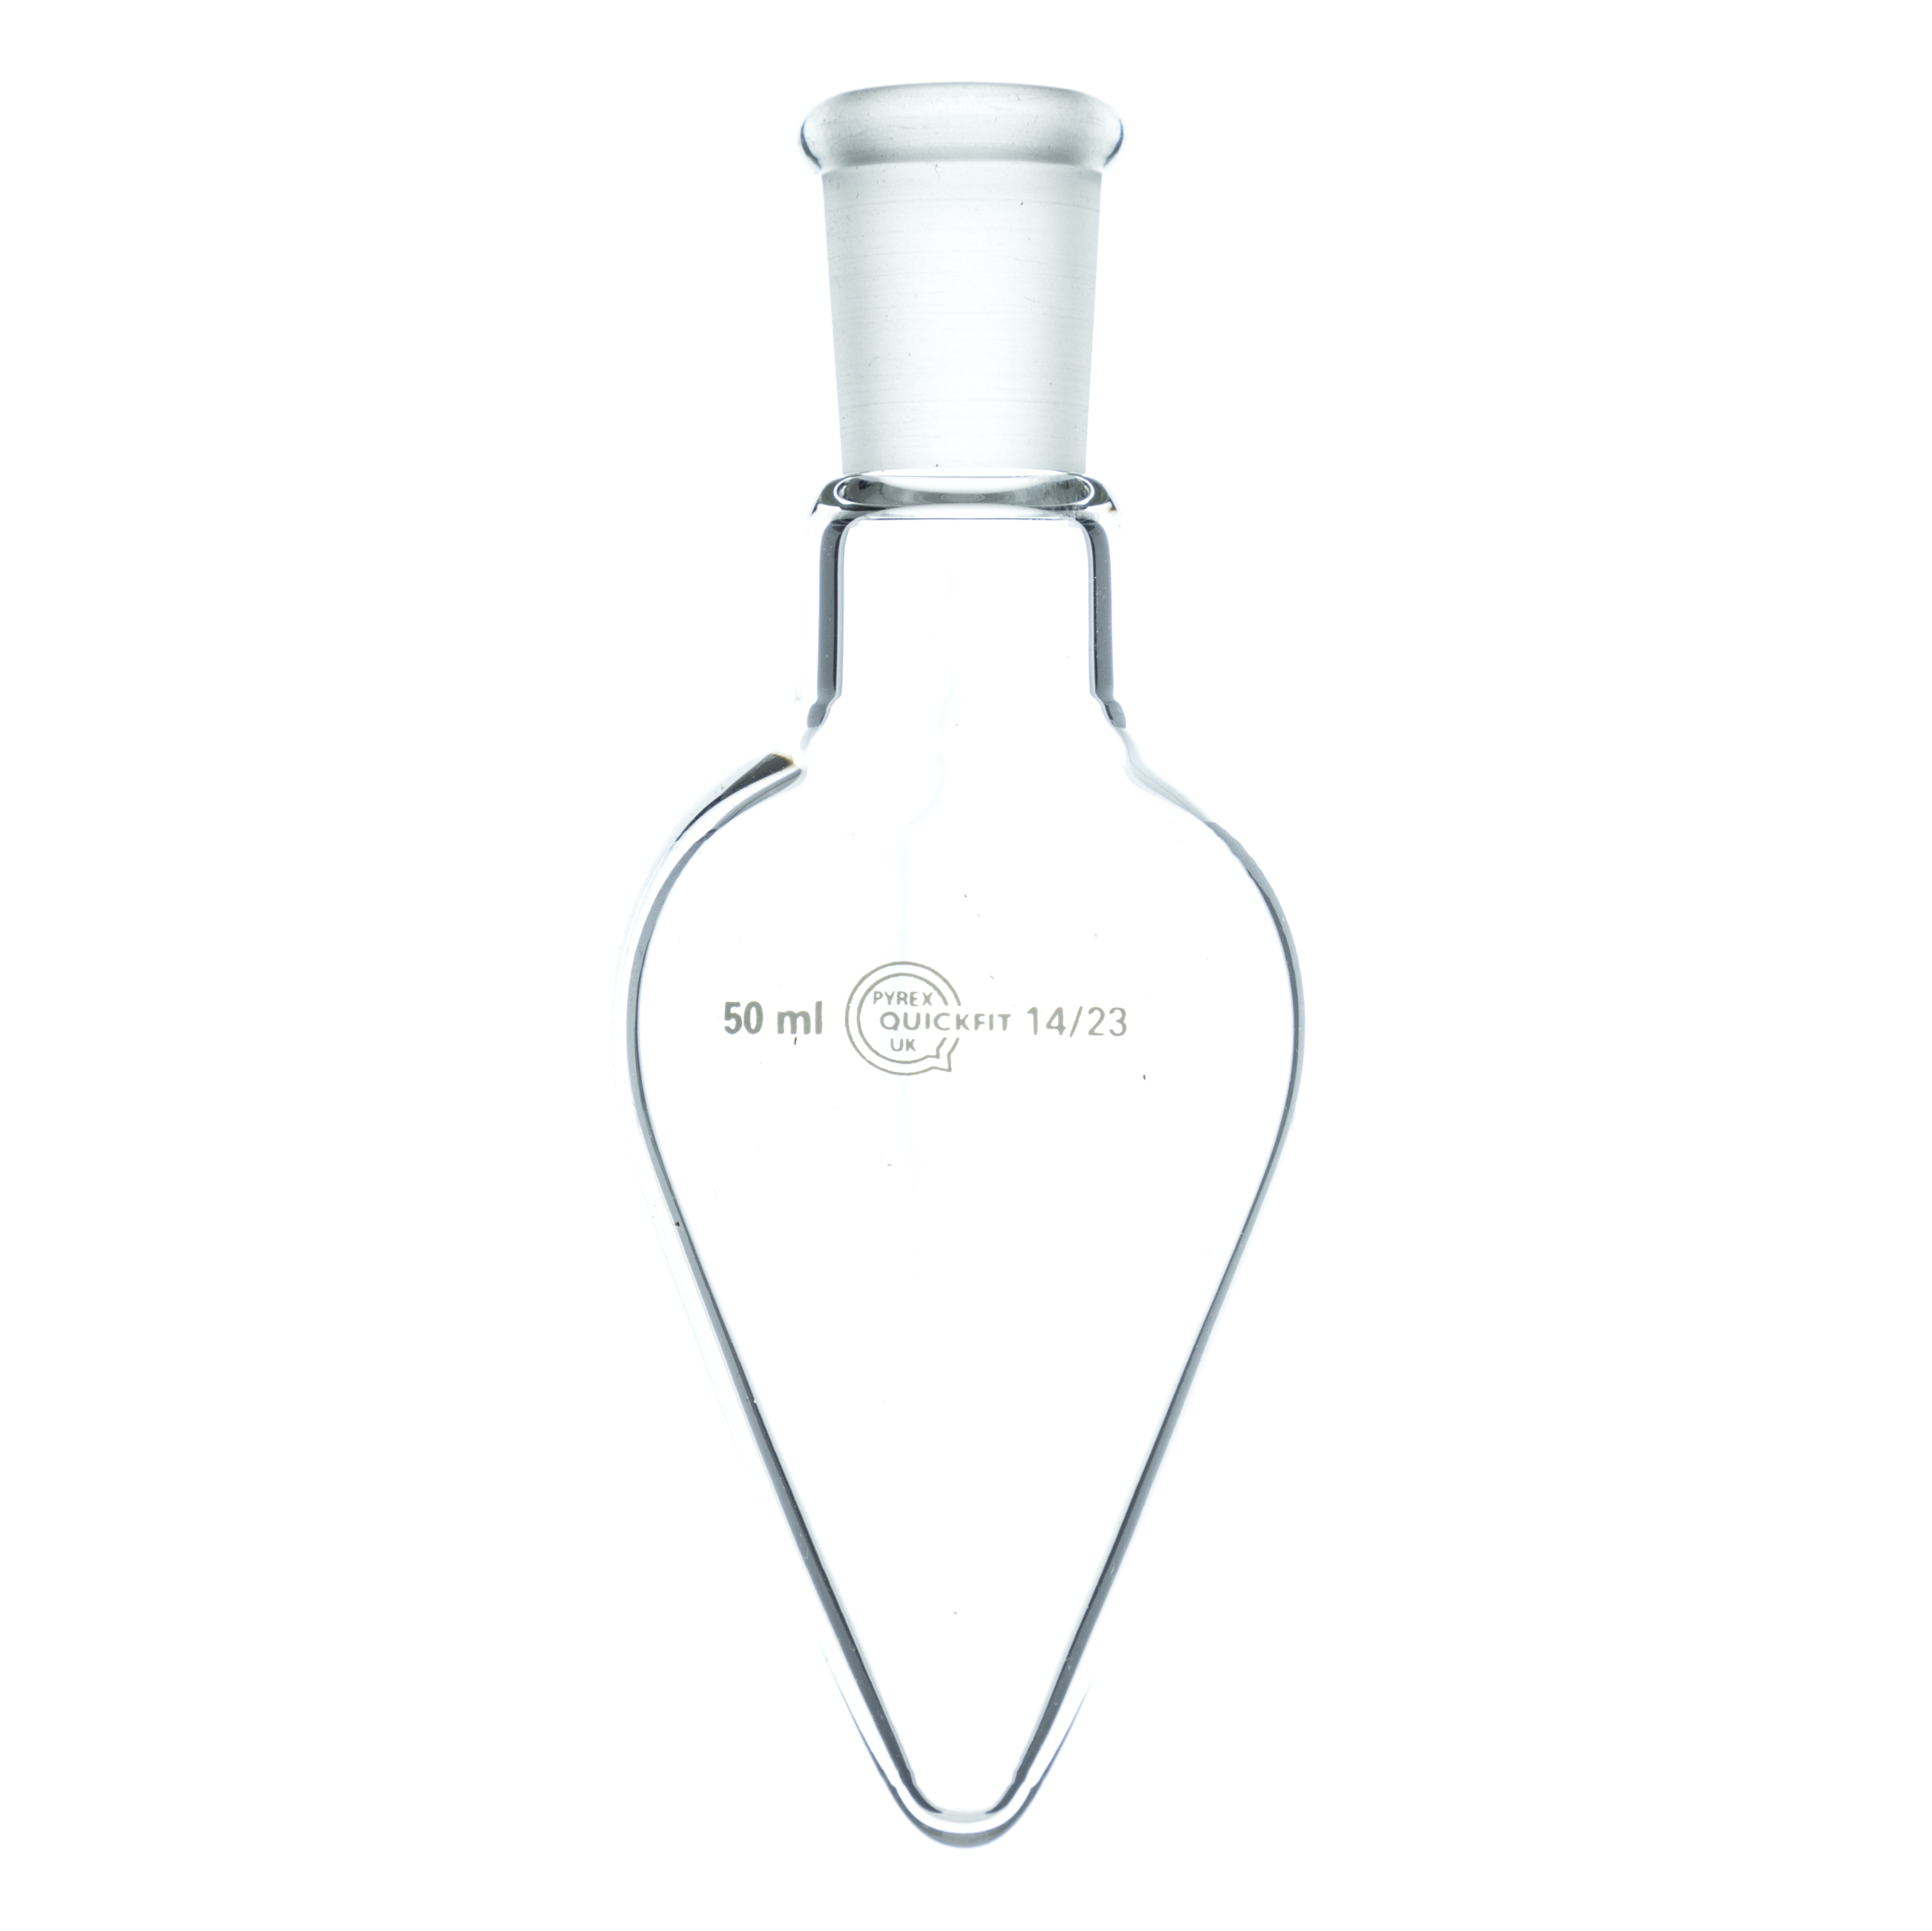 Quickfit Pear Shaped Flask 50ml 14-23